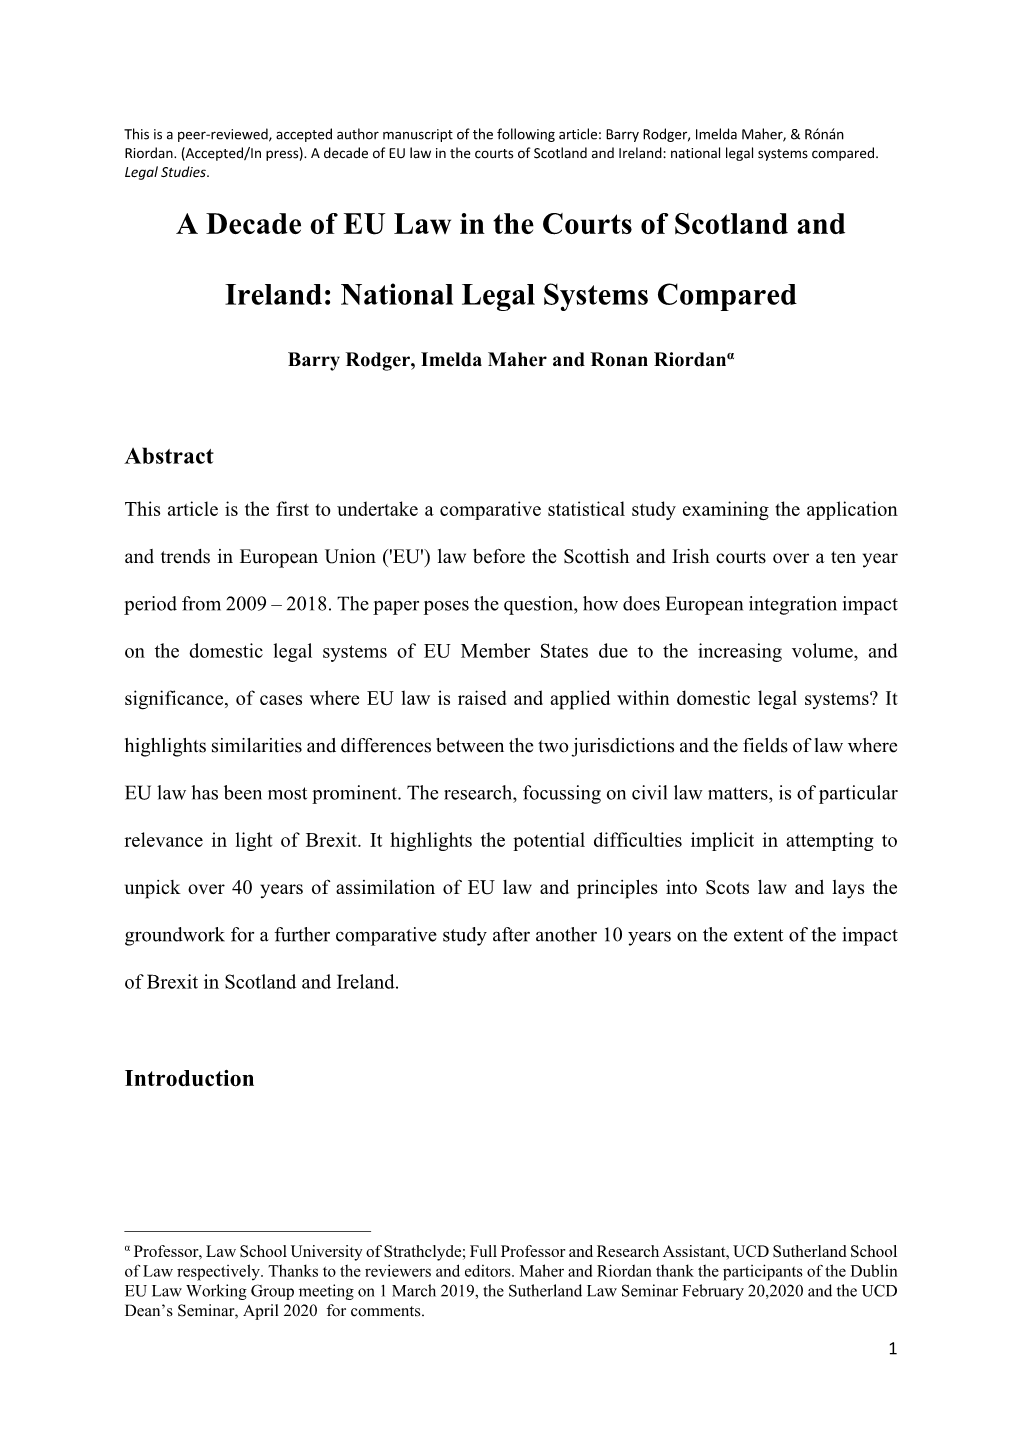 A Decade of EU Law in the Courts of Scotland and Ireland: National Legal Systems Compared